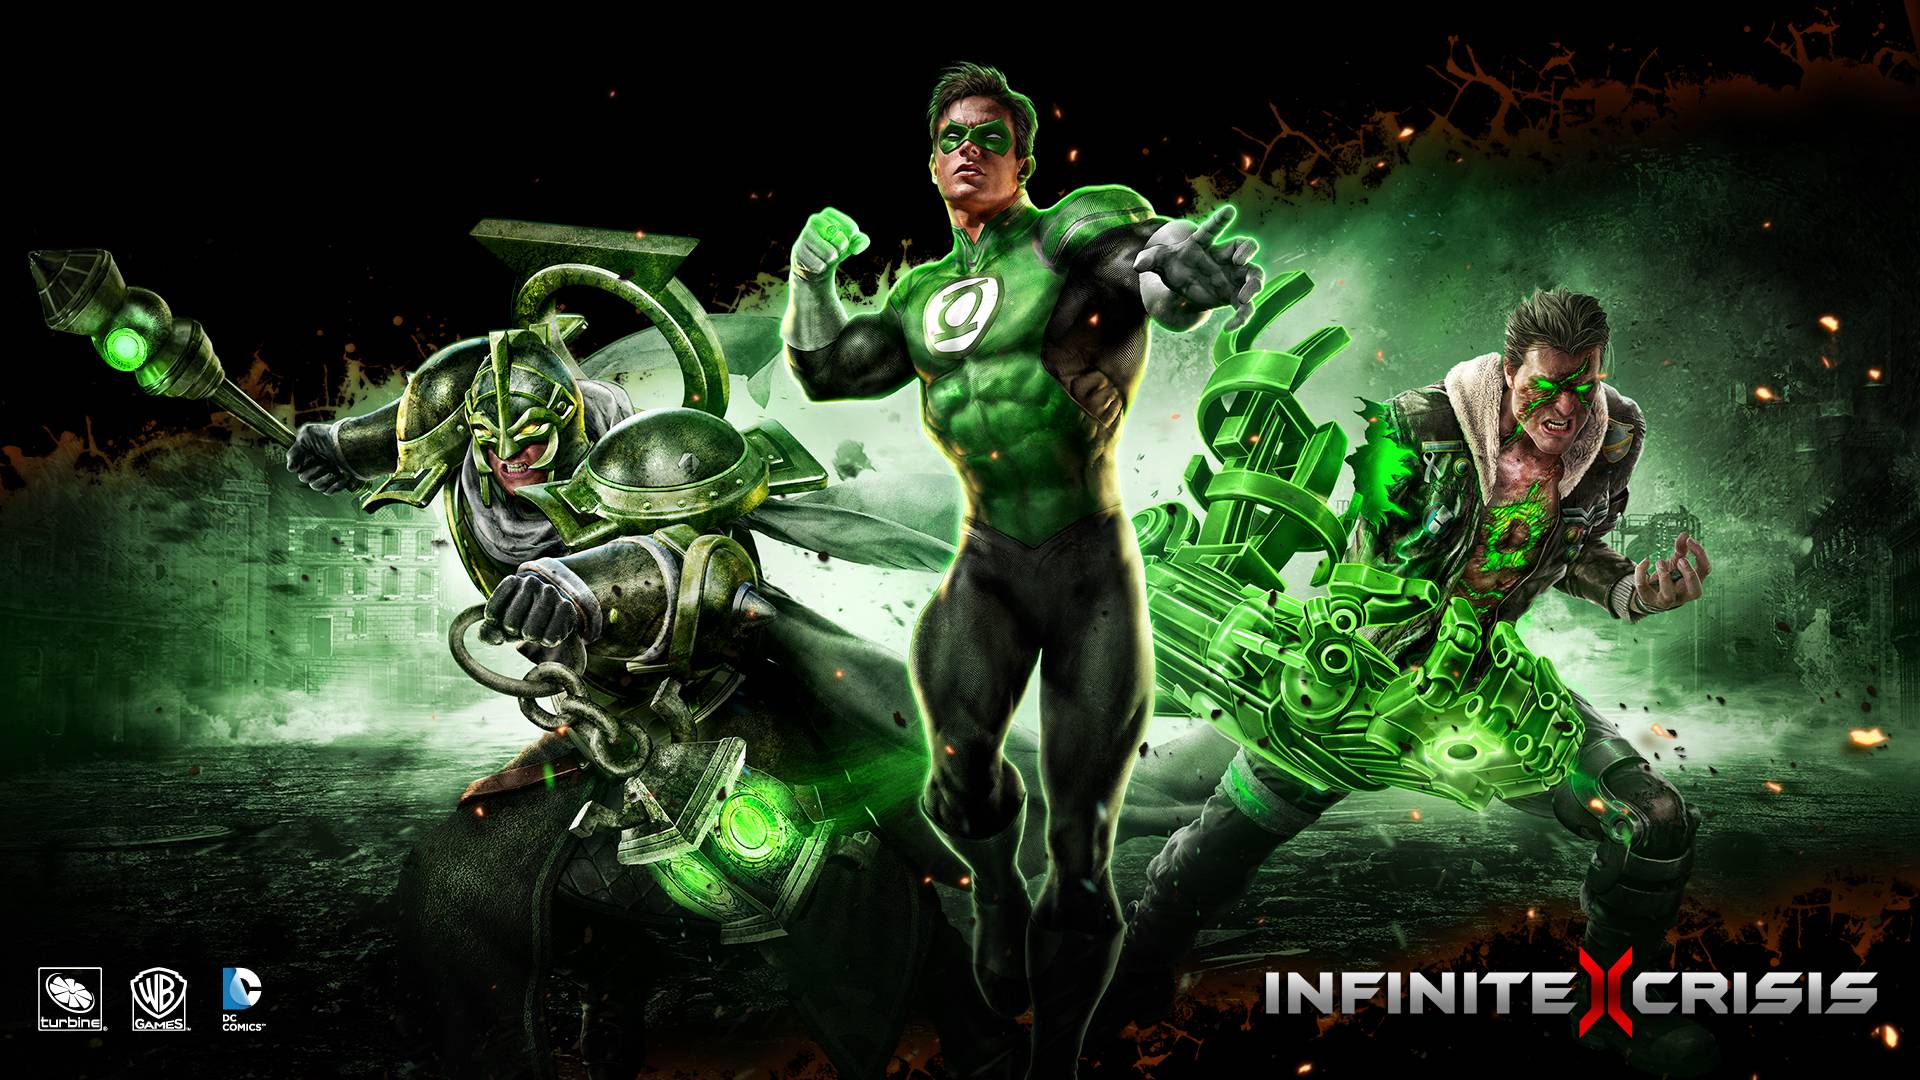 badass wallpapers,action adventure game,green lantern,green,fictional character,pc game